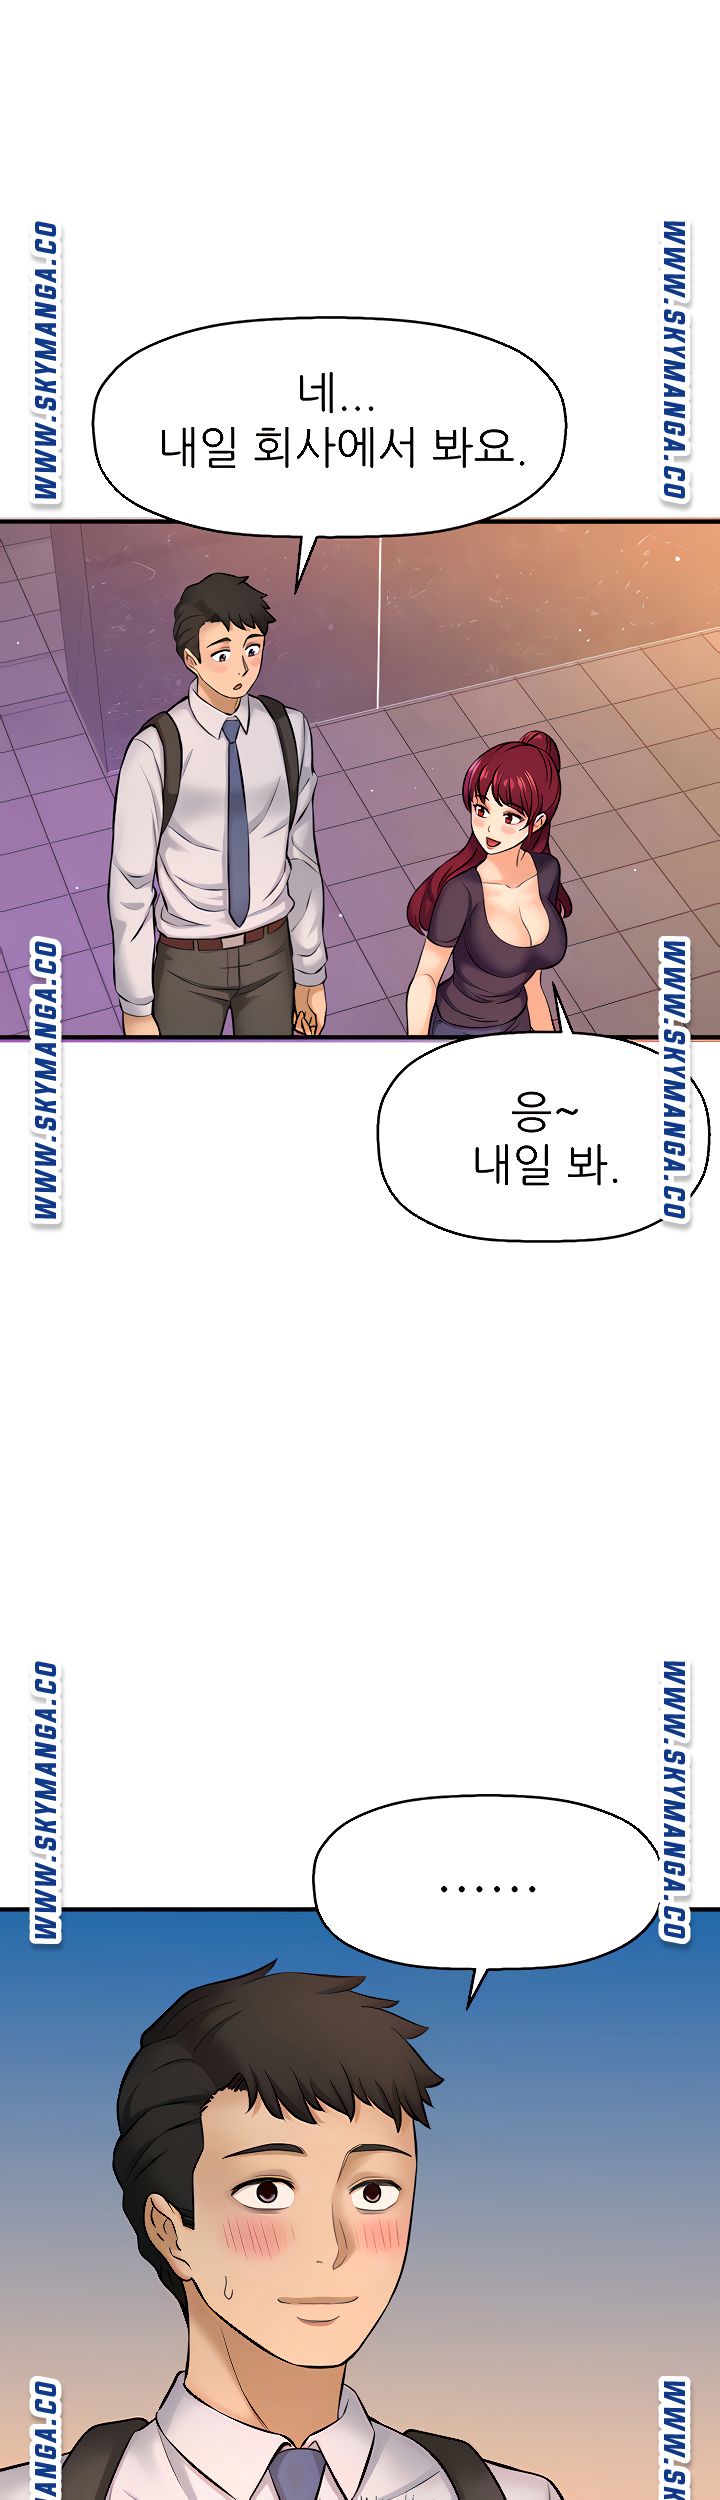 I Want to Know Her Raw - Chapter 14 Page 4